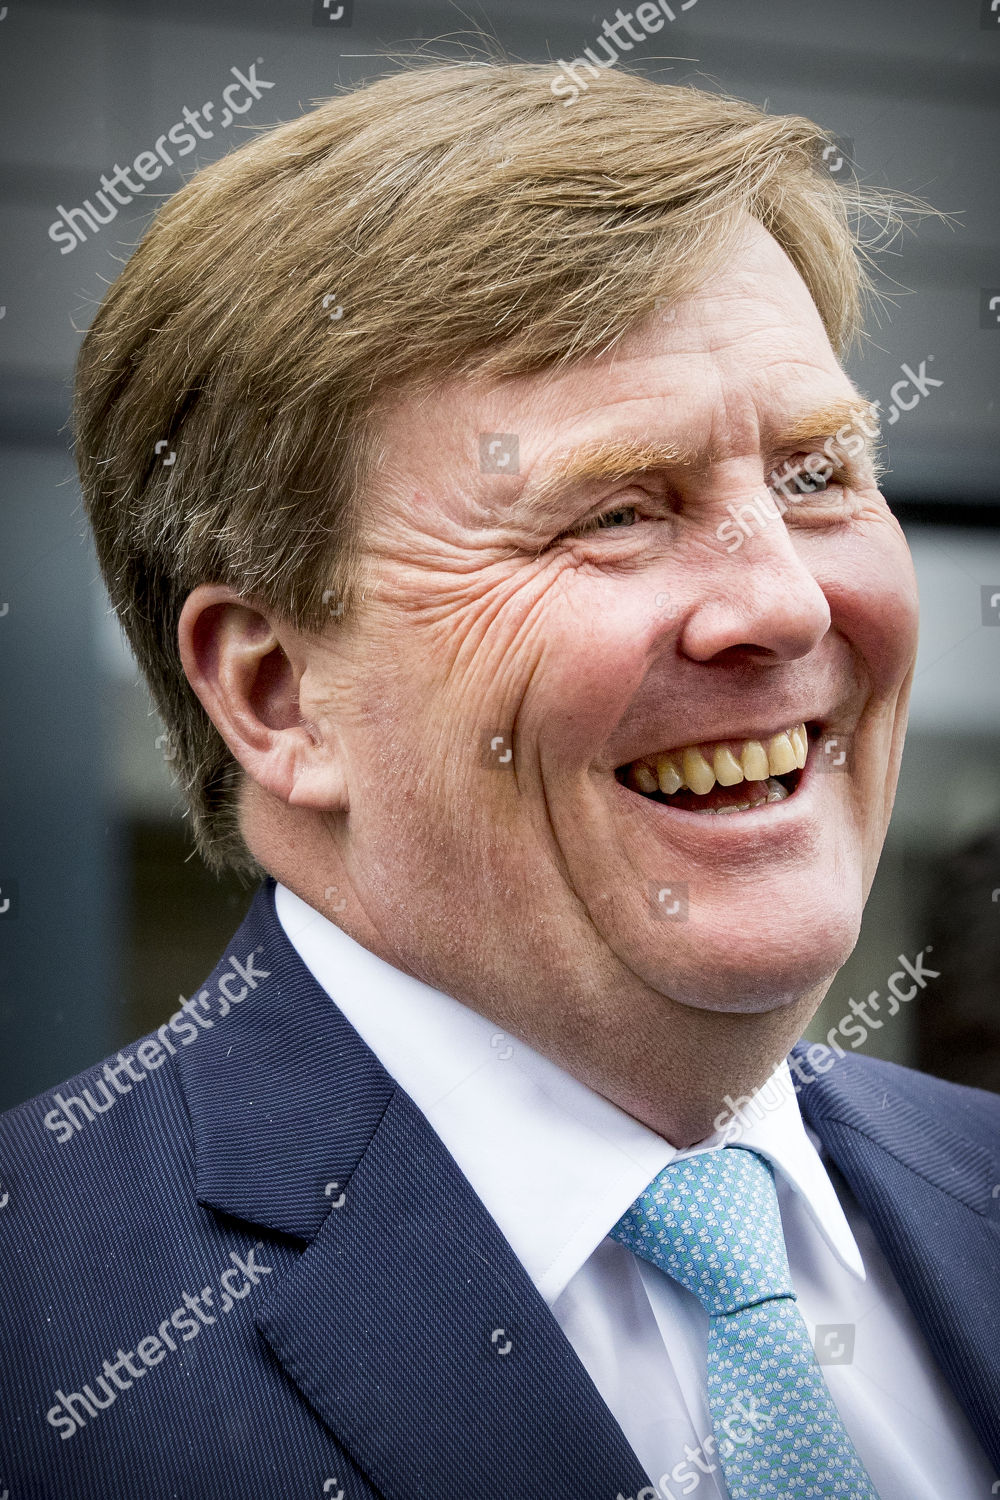 king-willem-alexander-of-the-netherlands-visits-the-extension-at-the-nestle-baby-food-plant-in-nunspeet-nunspeet-the-netherlands-shutterstock-editorial-9482652b.jpg